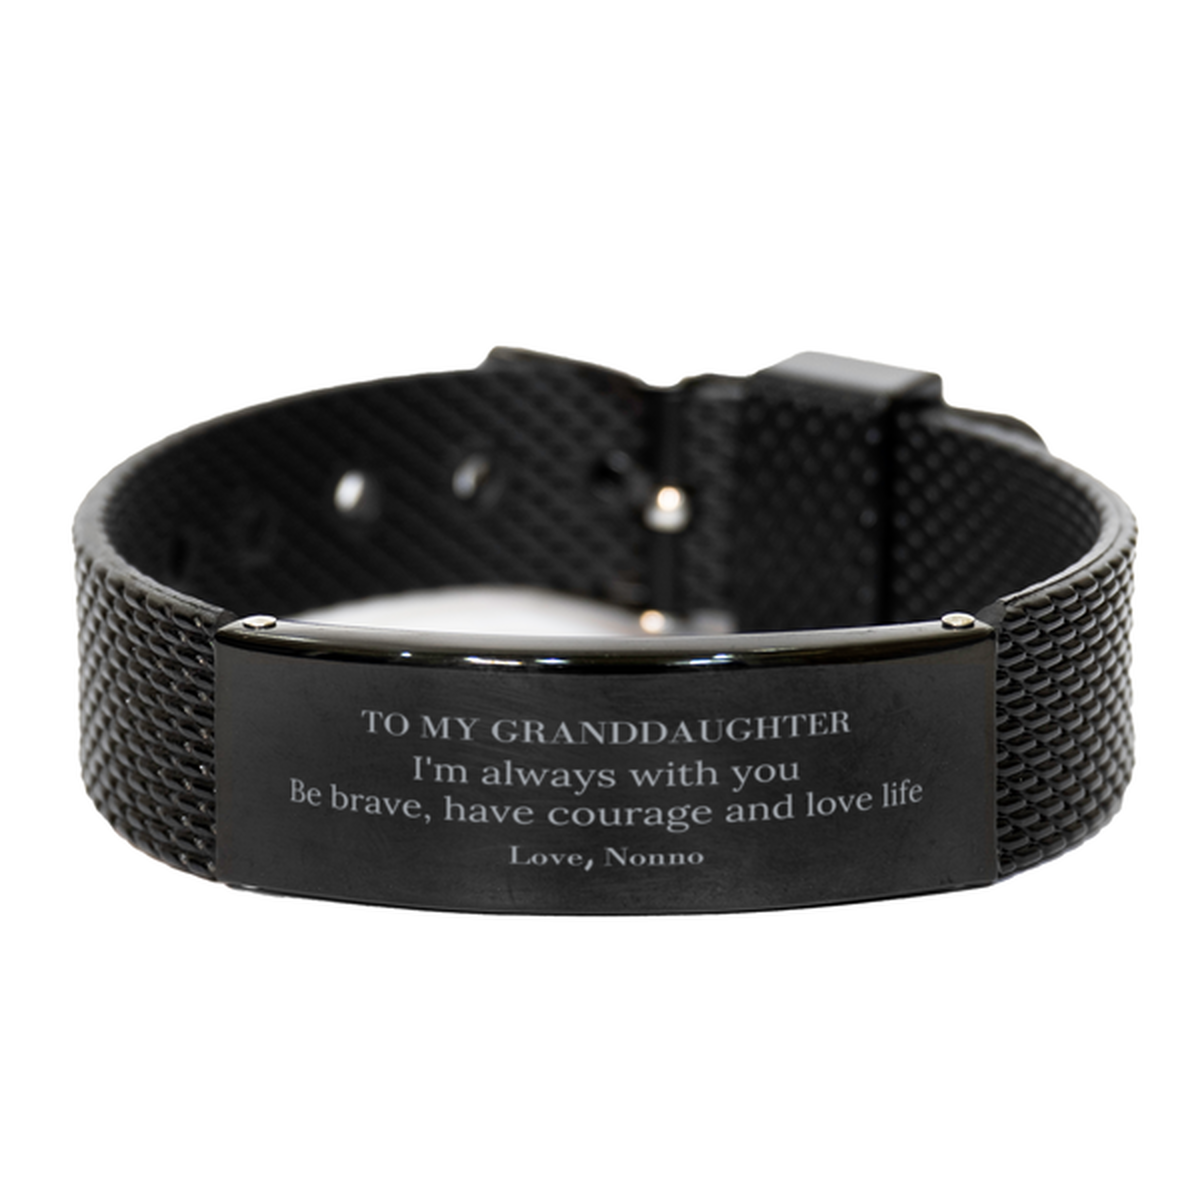 To My Granddaughter Gifts from Nonno, Unique Black Shark Mesh Bracelet Inspirational Christmas Birthday Graduation Gifts for Granddaughter I'm always with you. Be brave, have courage and love life. Love, Nonno